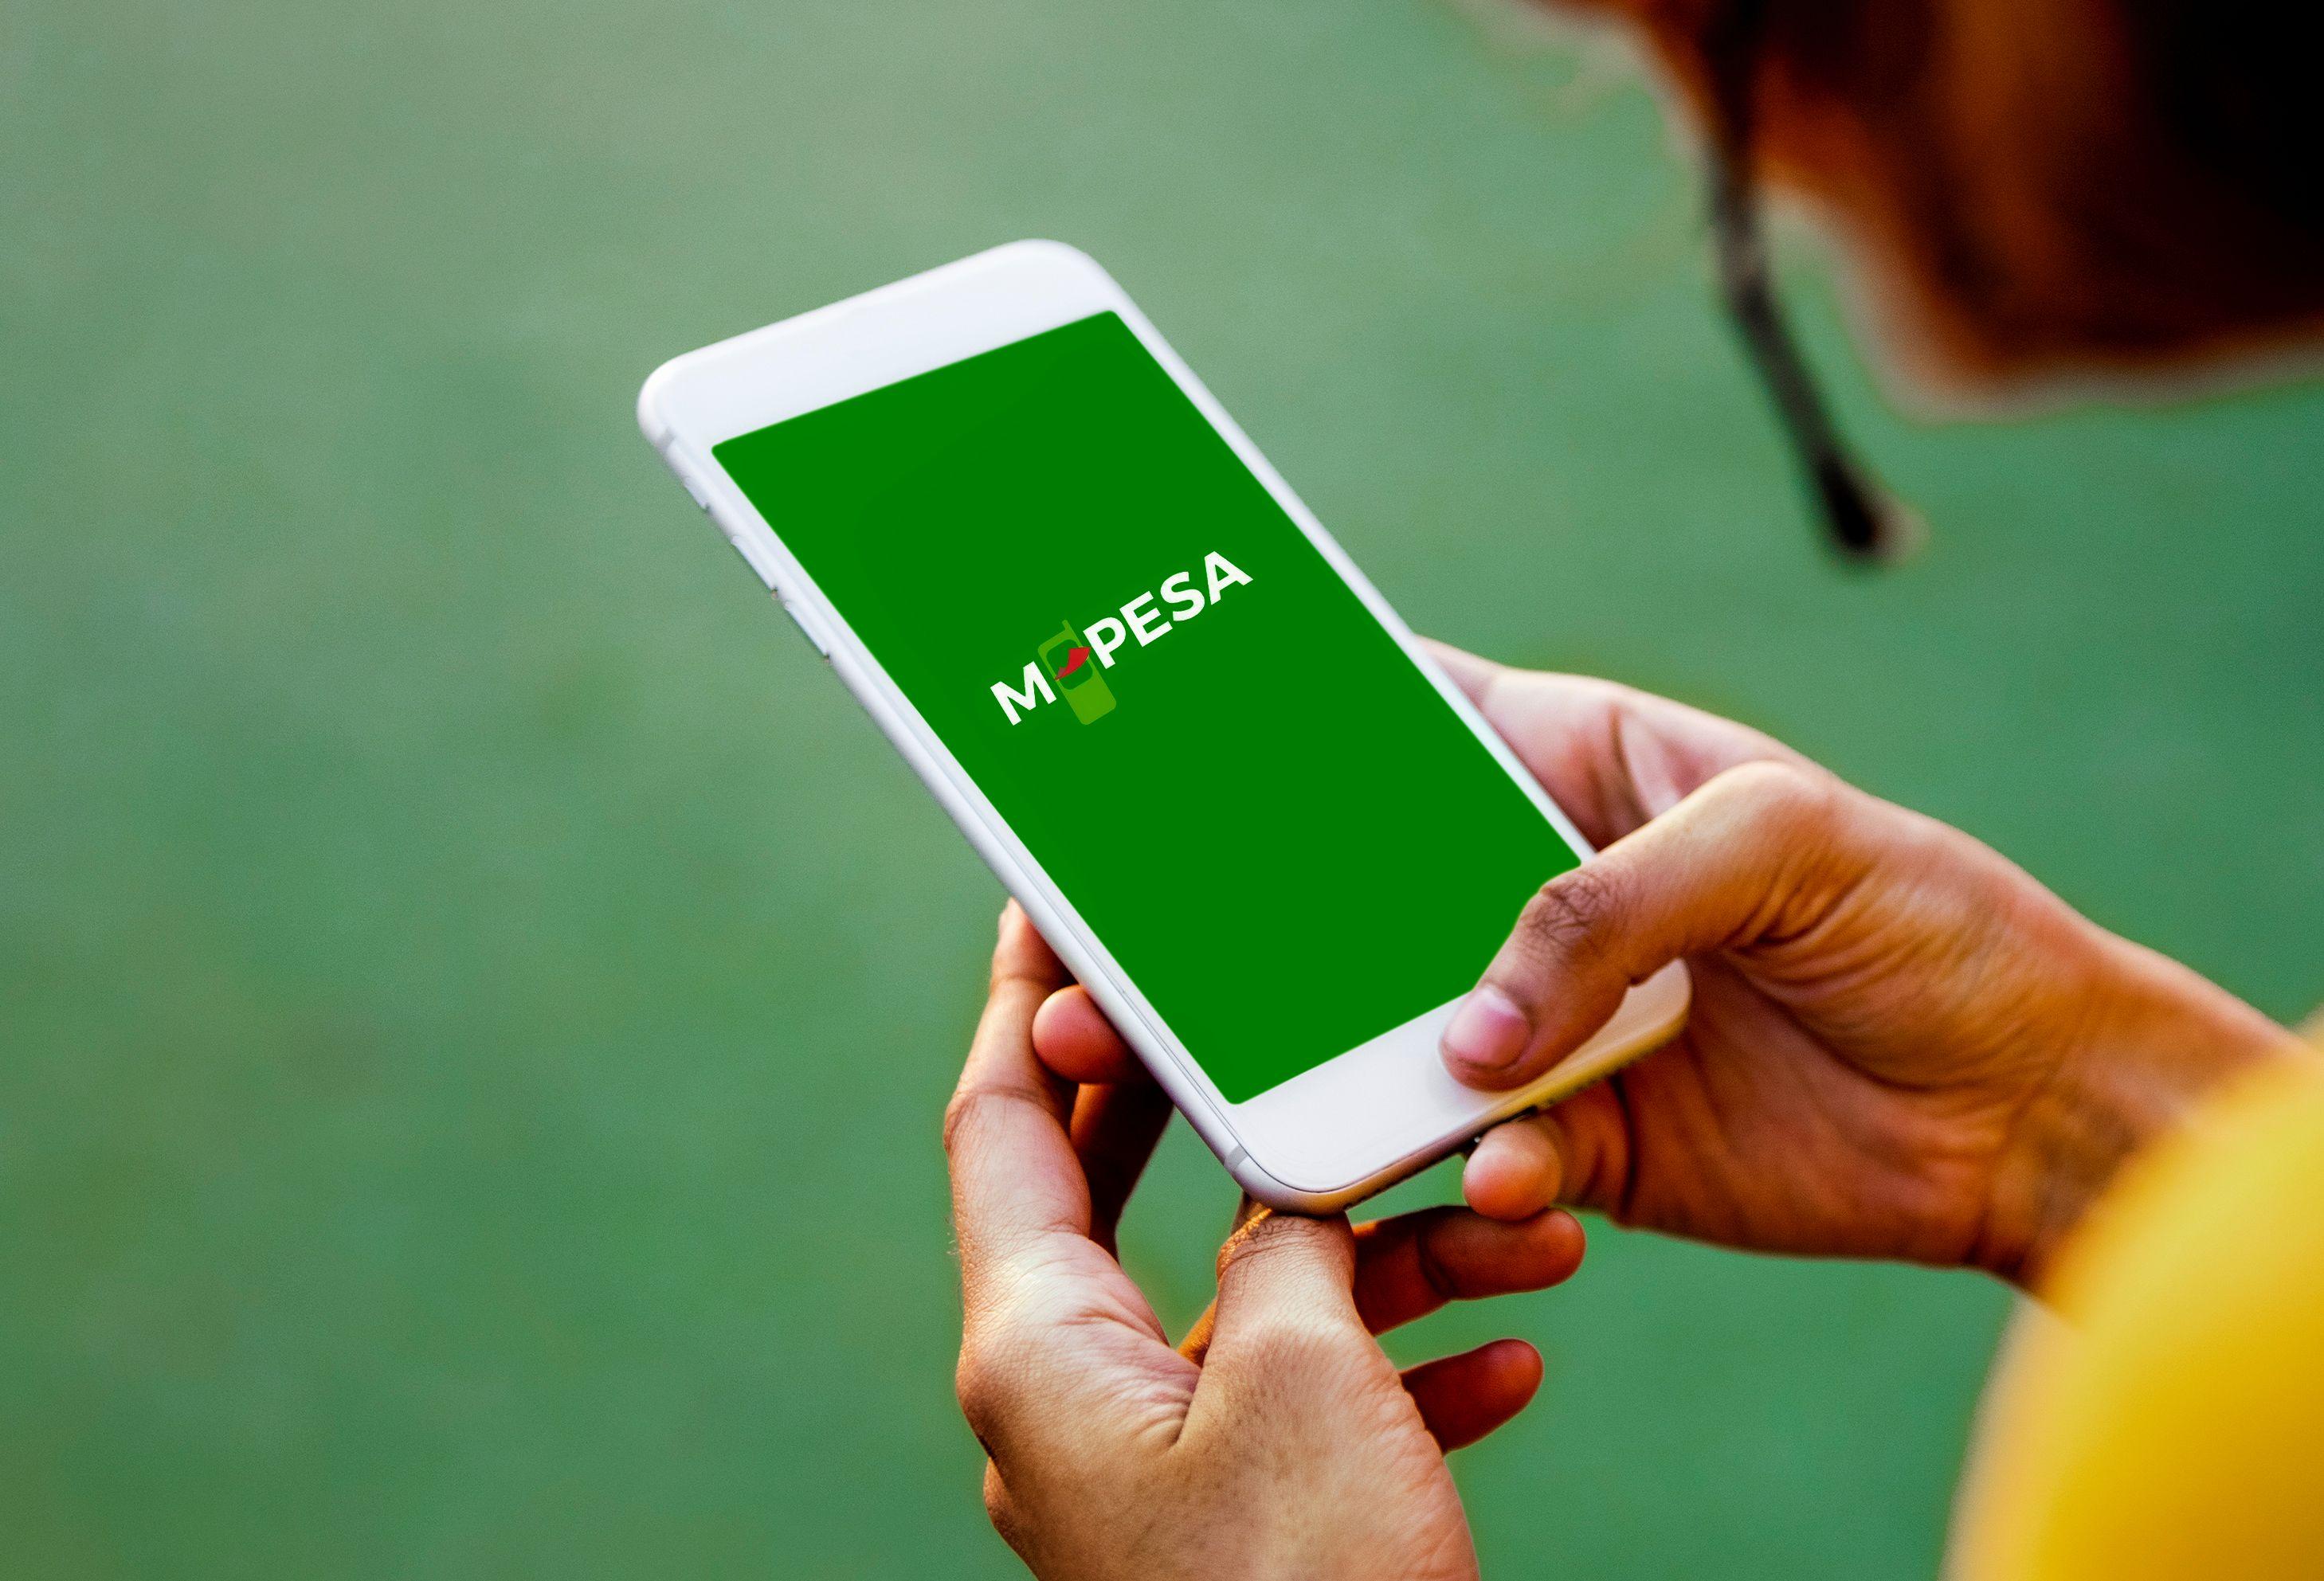 M-pesa entry into Ethiopia signals start of mobile money battle 🇪🇹